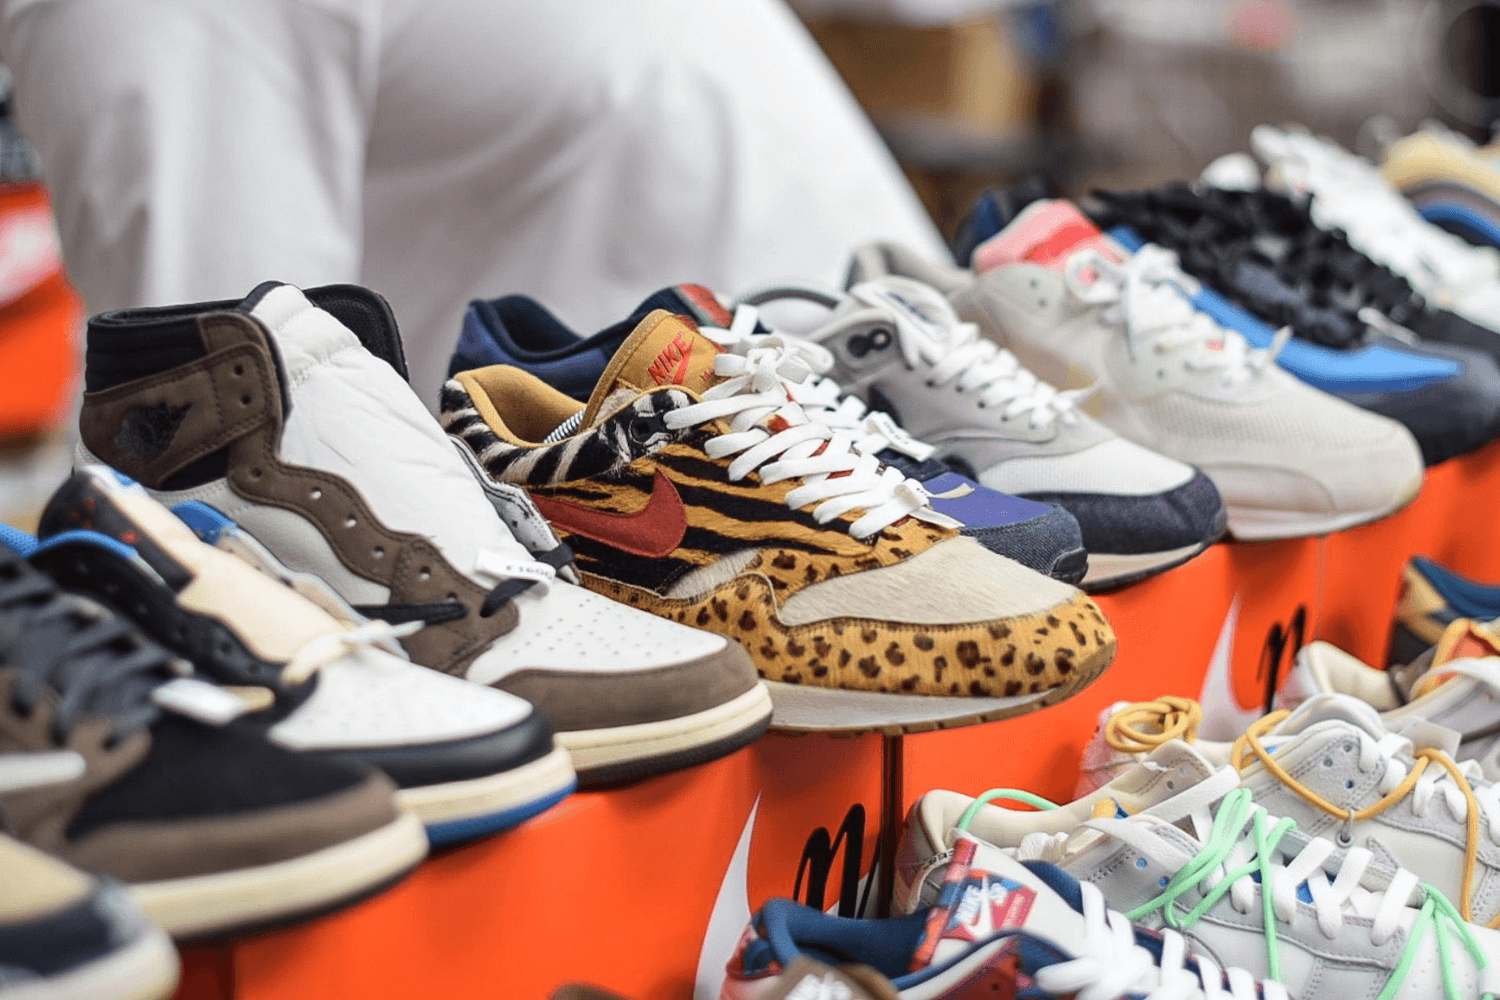 Crepe City takes place this weekend in Amsterdam